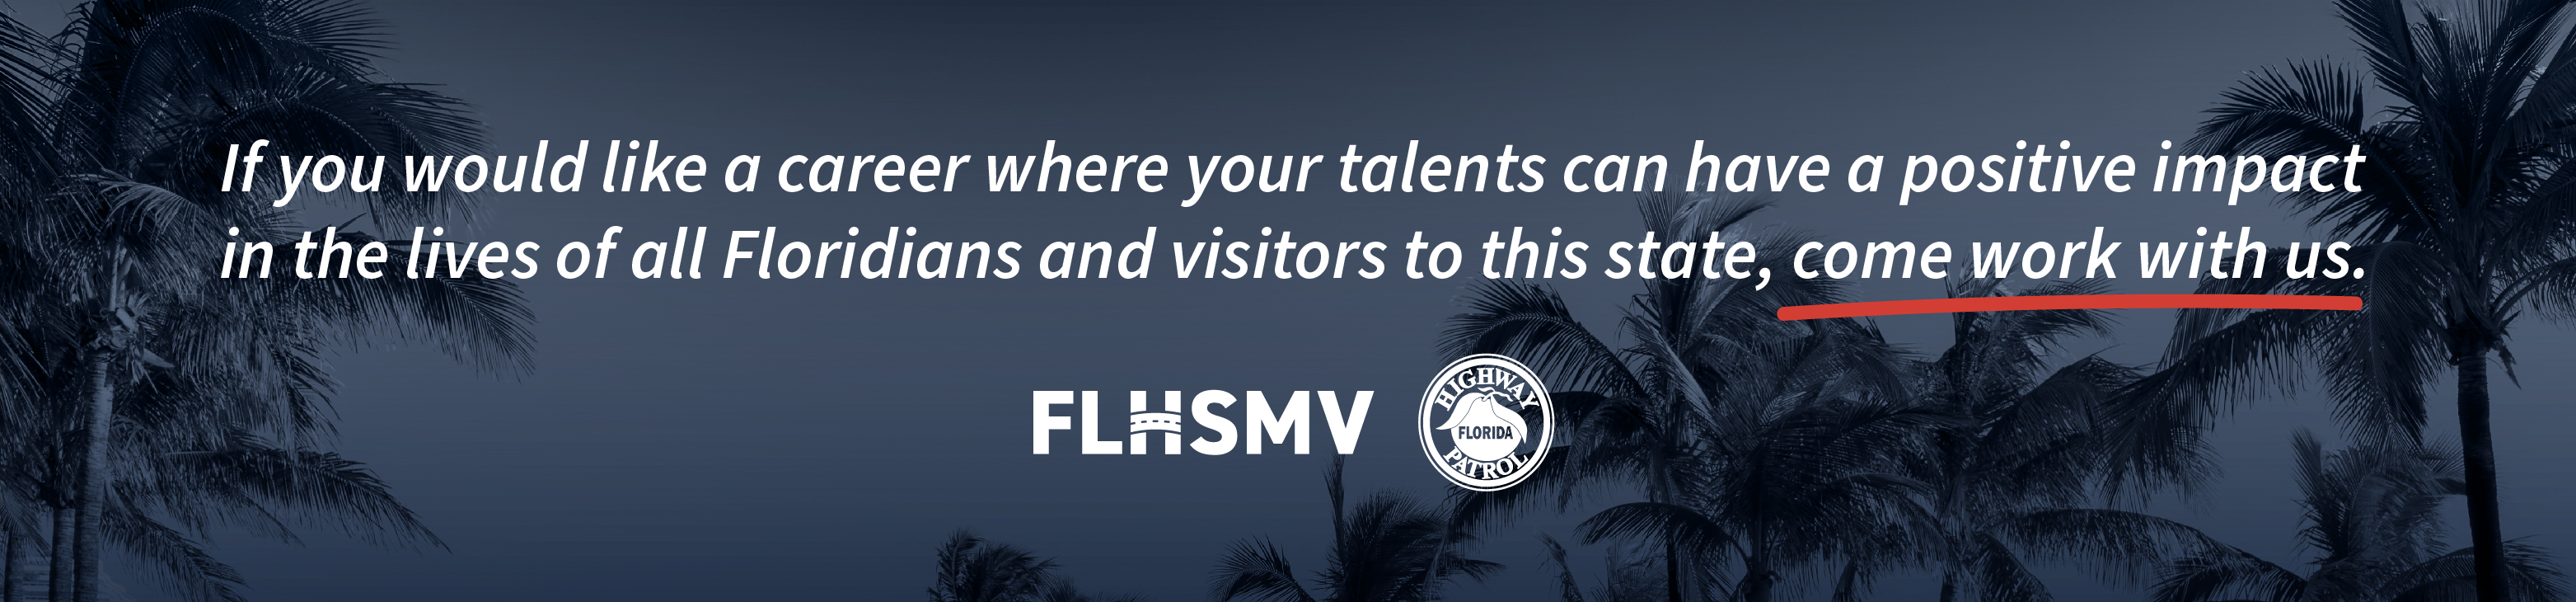 If you would like a career where your talents can have a positive impact in the lives of all Floridians and visitors to this state, come work with us.